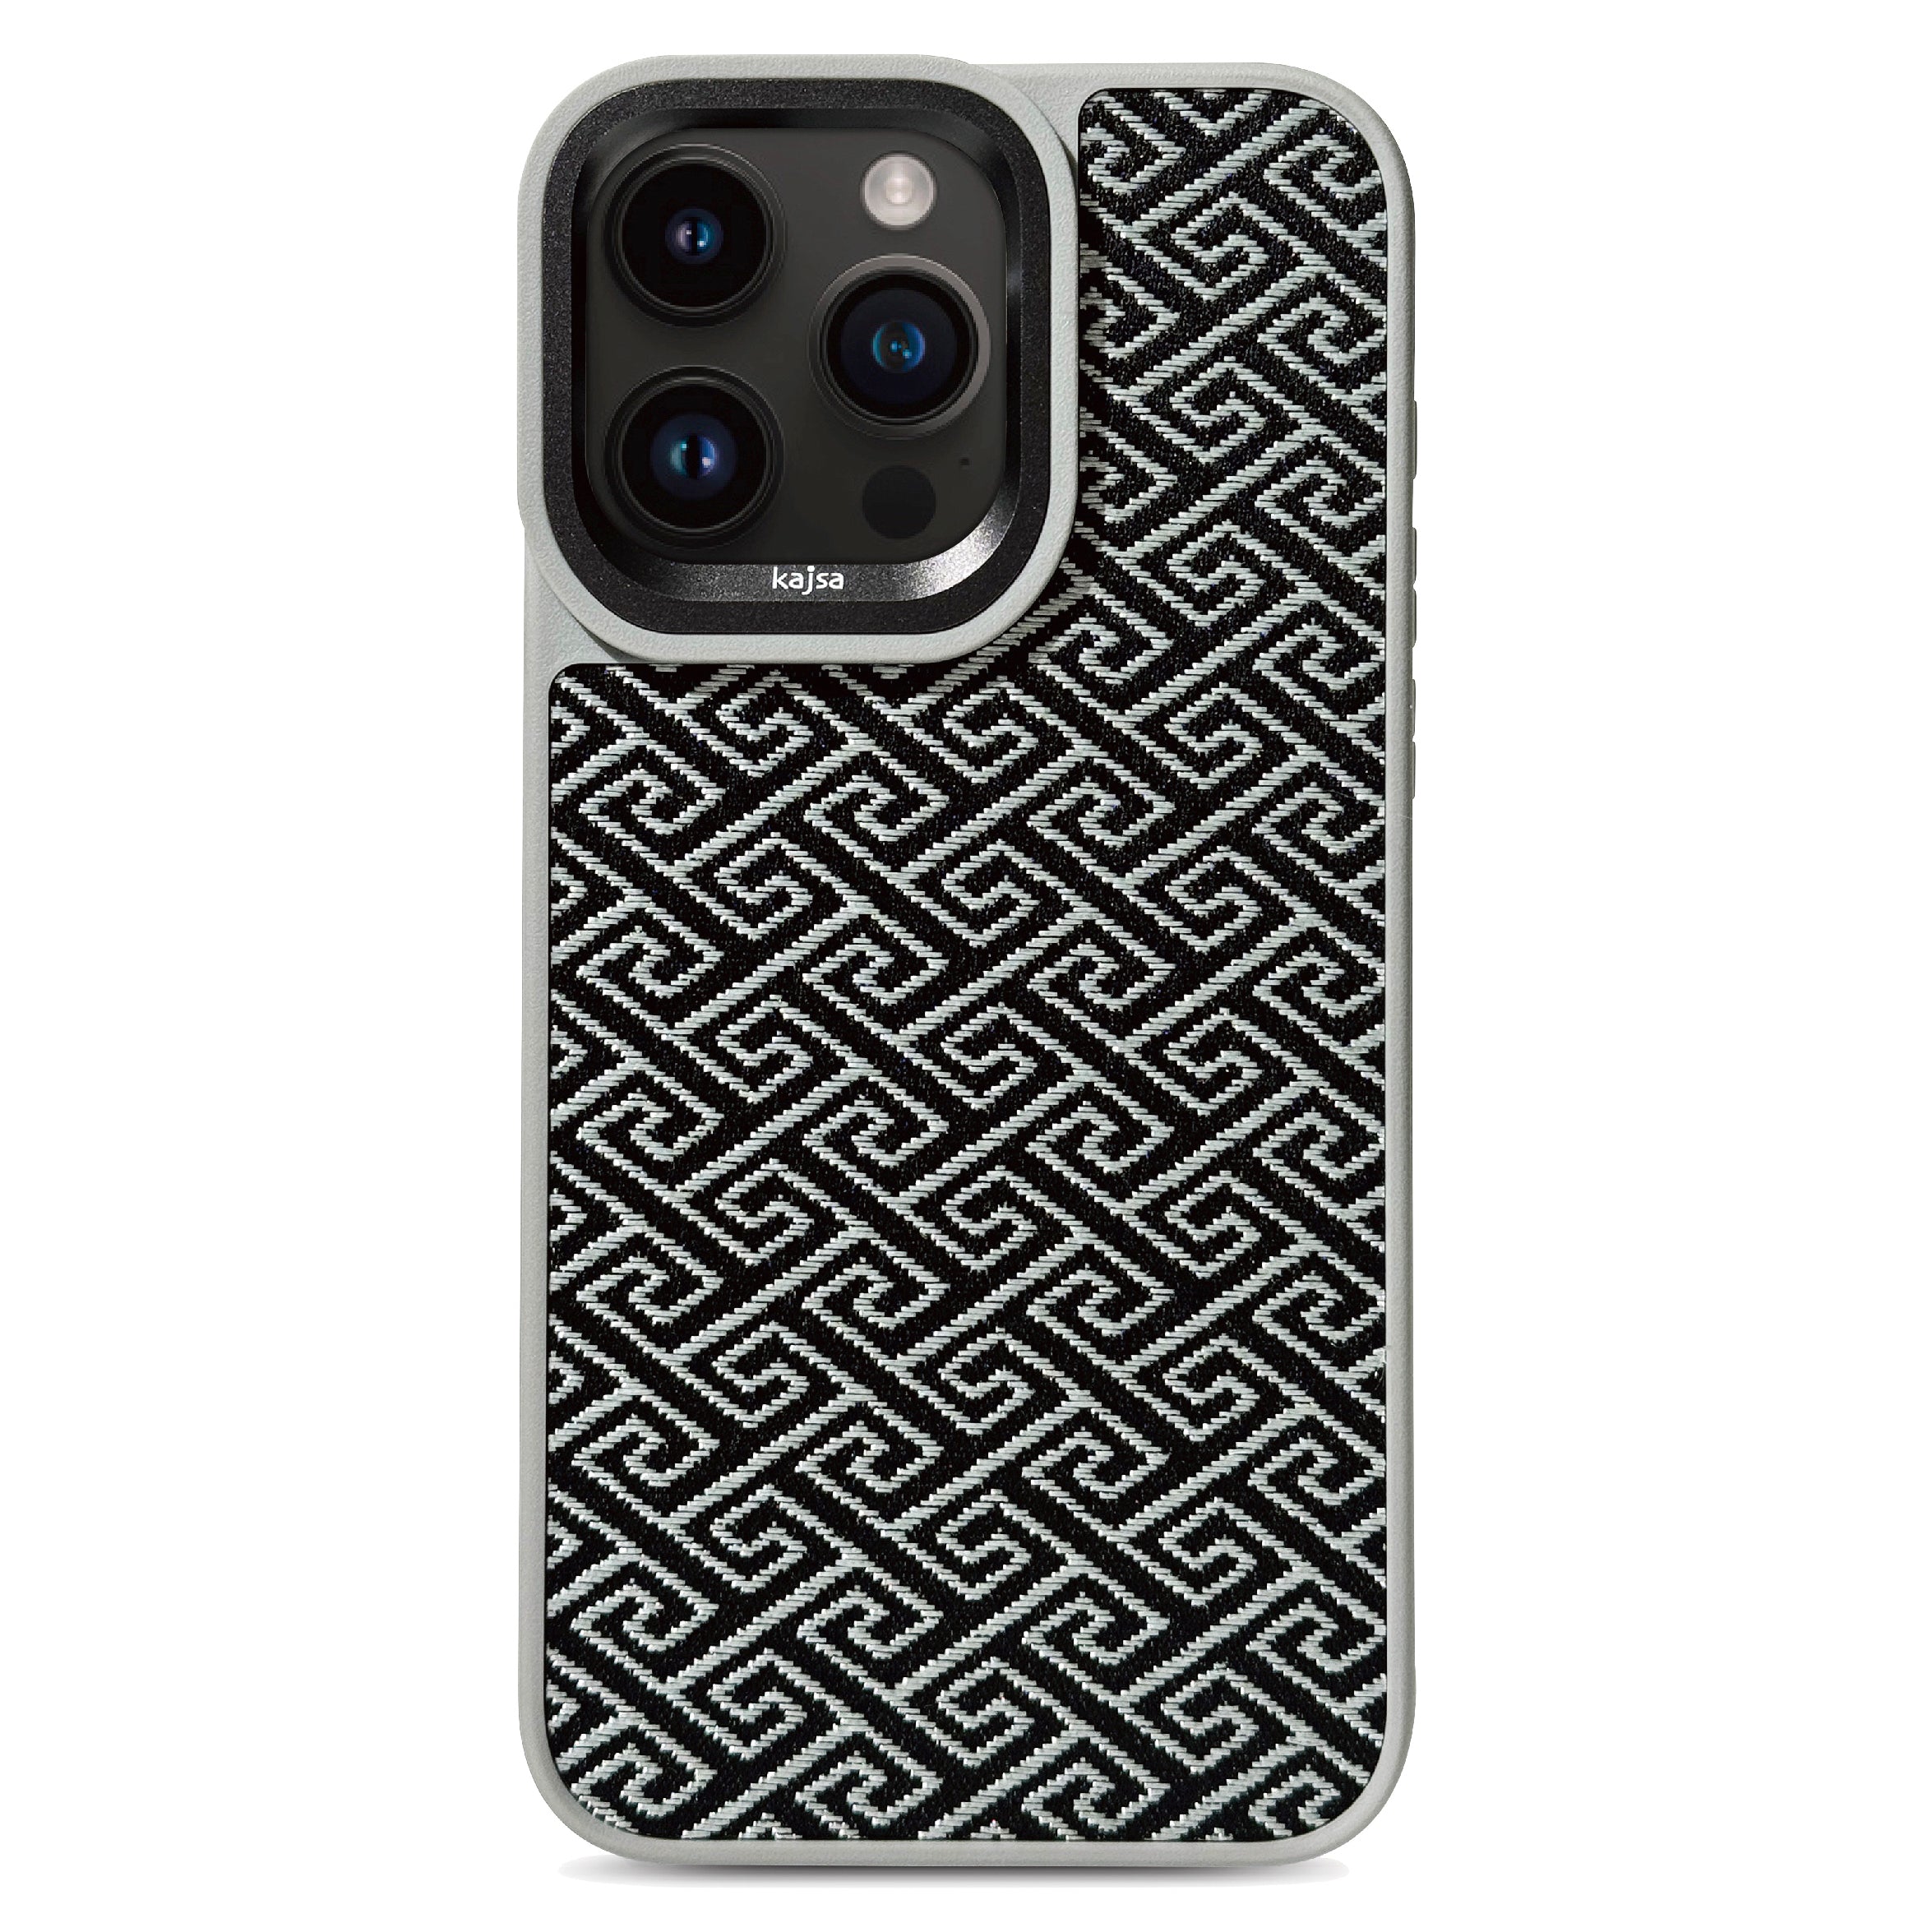 Preppie Collection - Sunken Back Case for iPhone 15